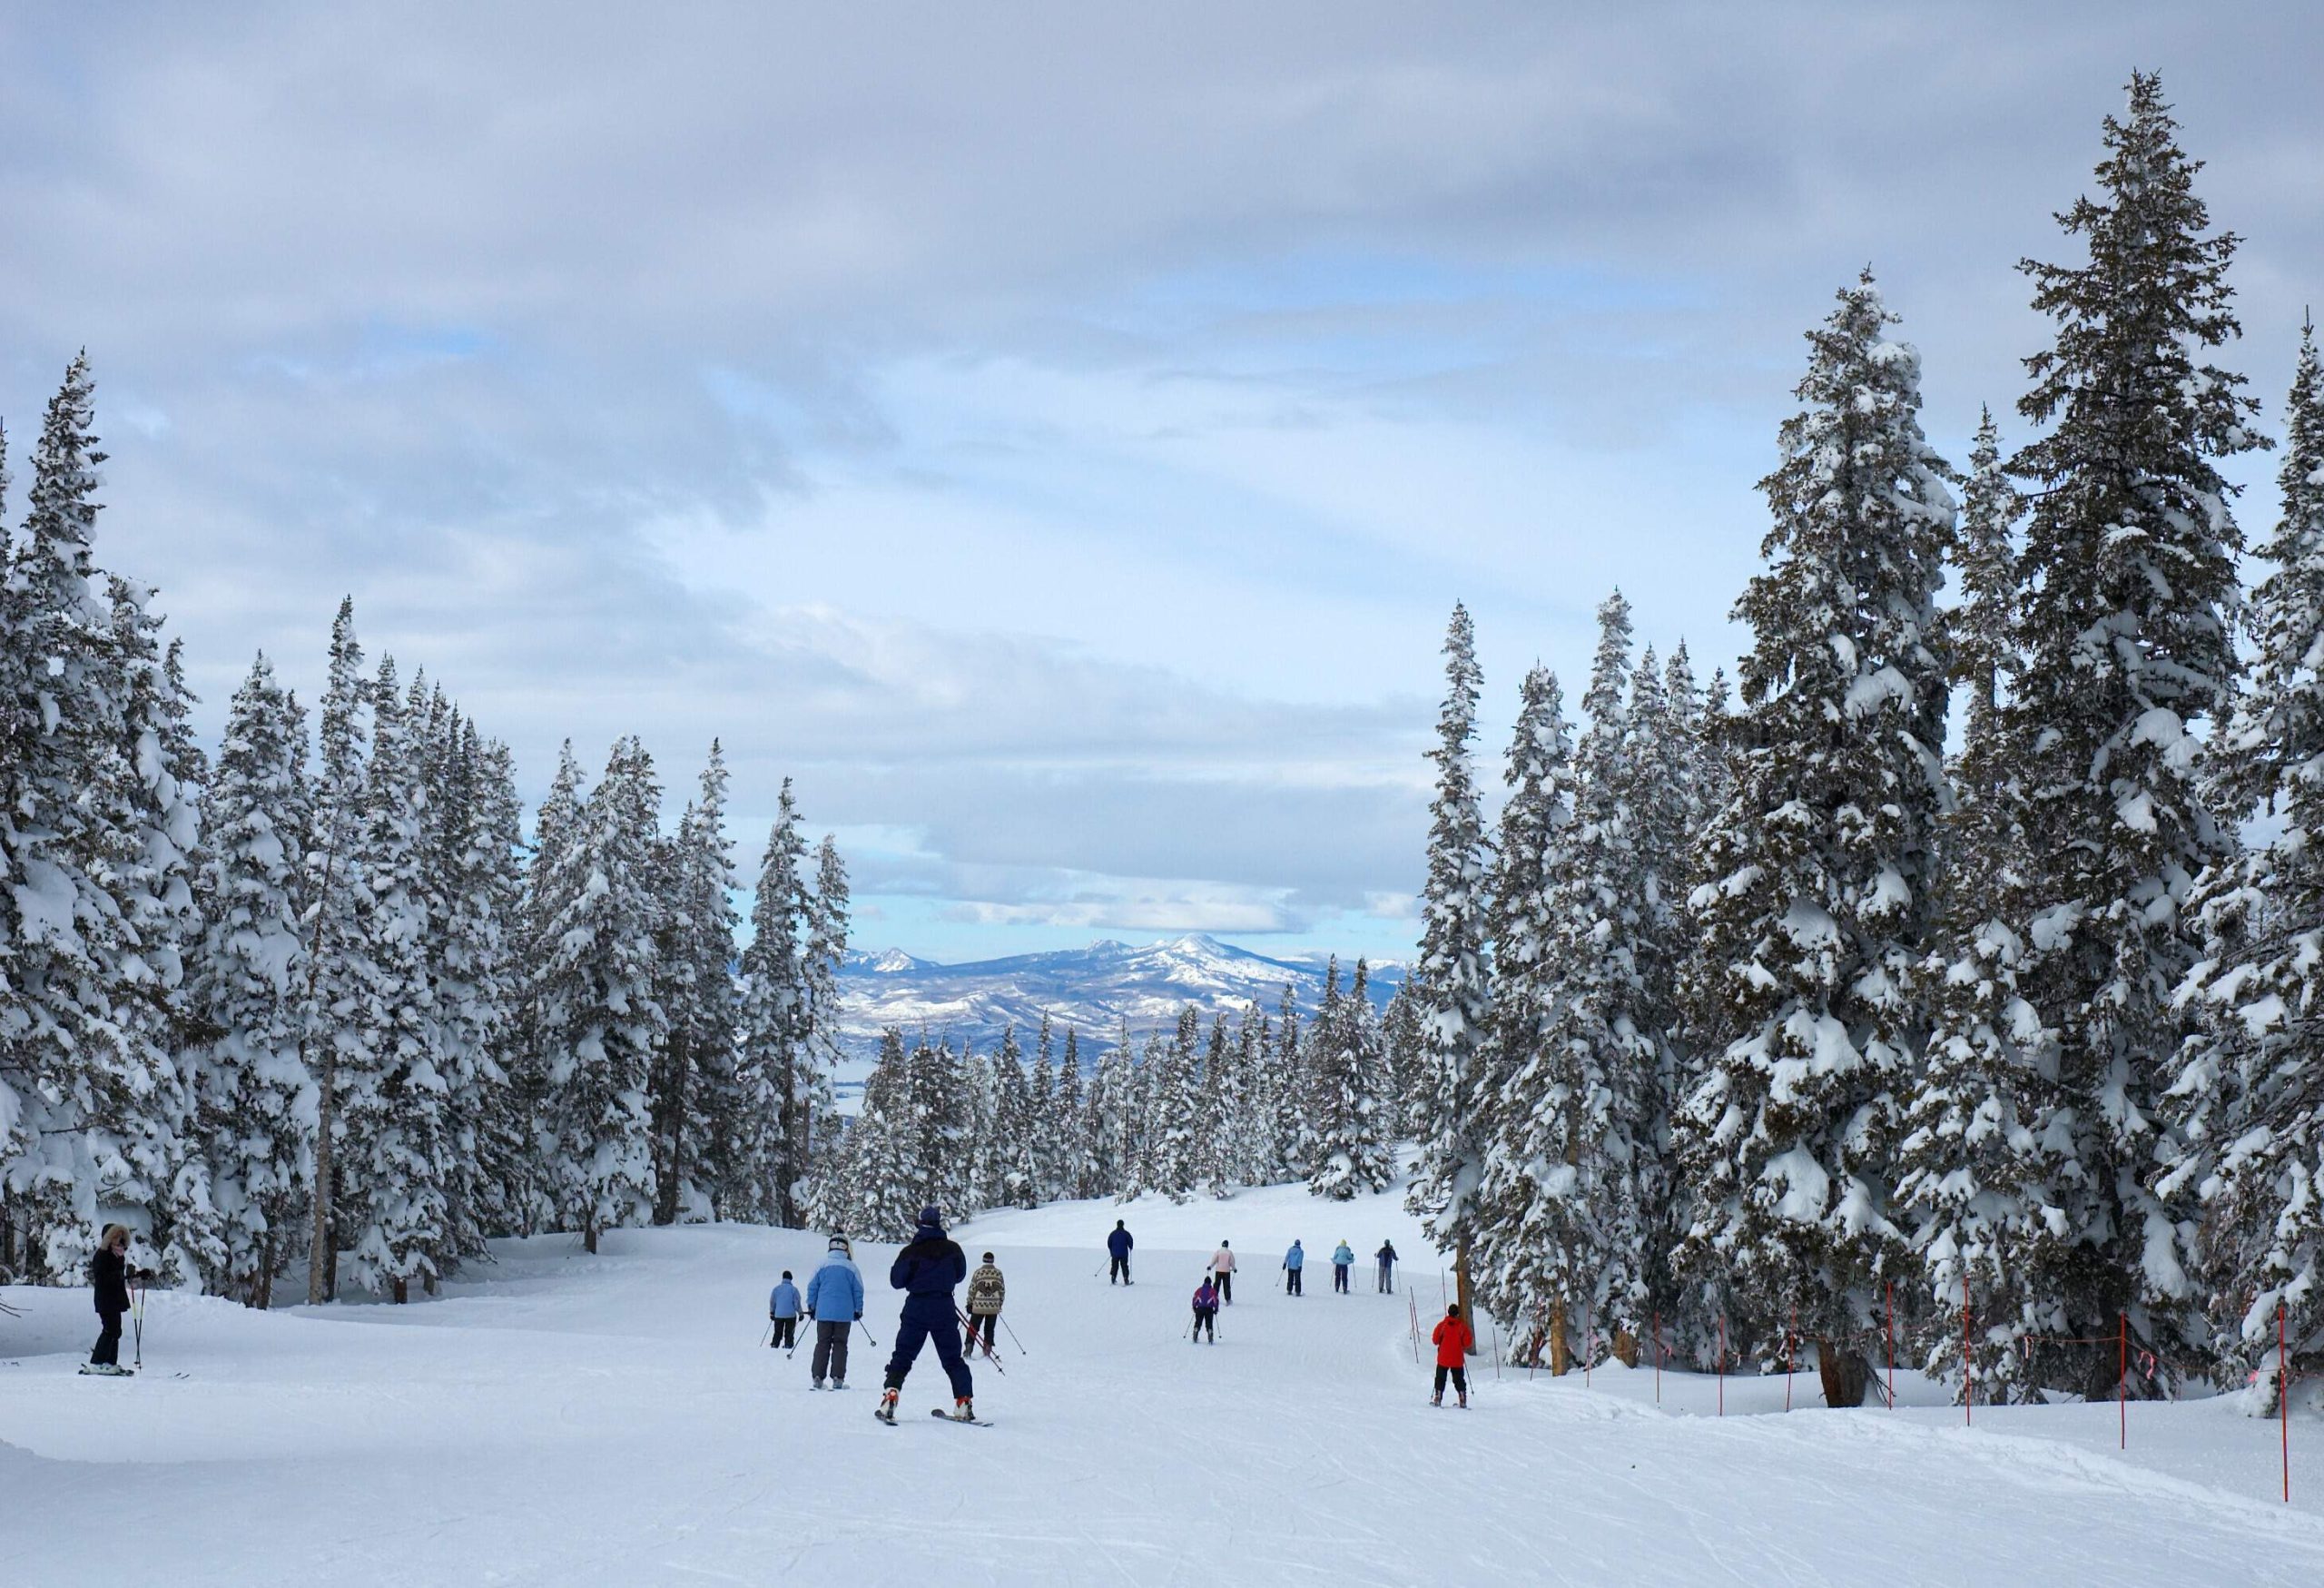 People skiing at a ski resort lined with tall frosty pine trees overlooking snow-capped mountains.